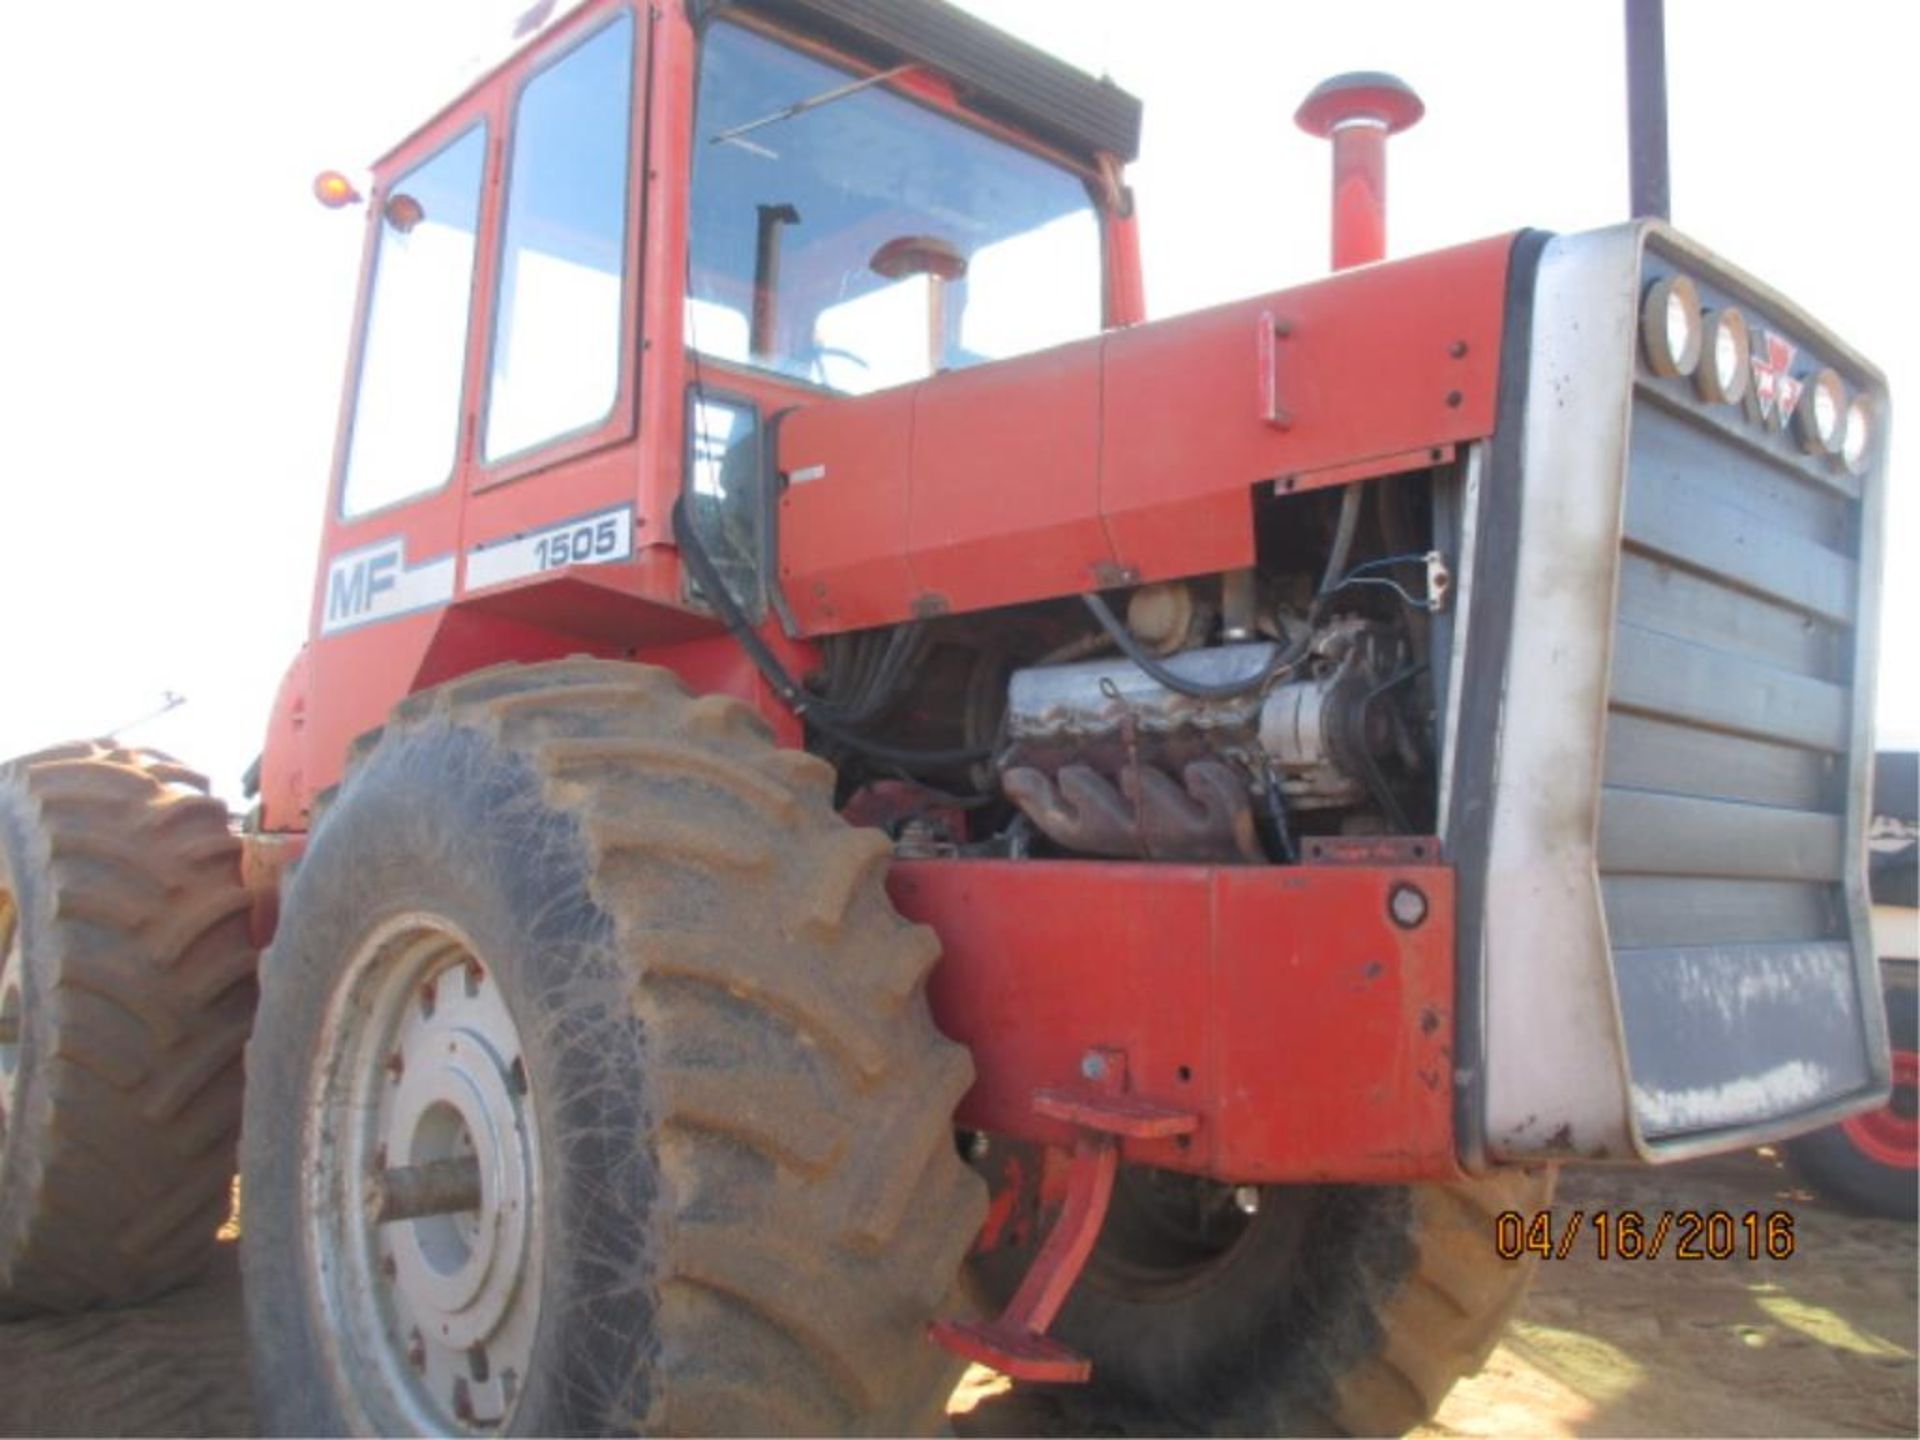 1505 MF 4wd Tractor - Image 2 of 6